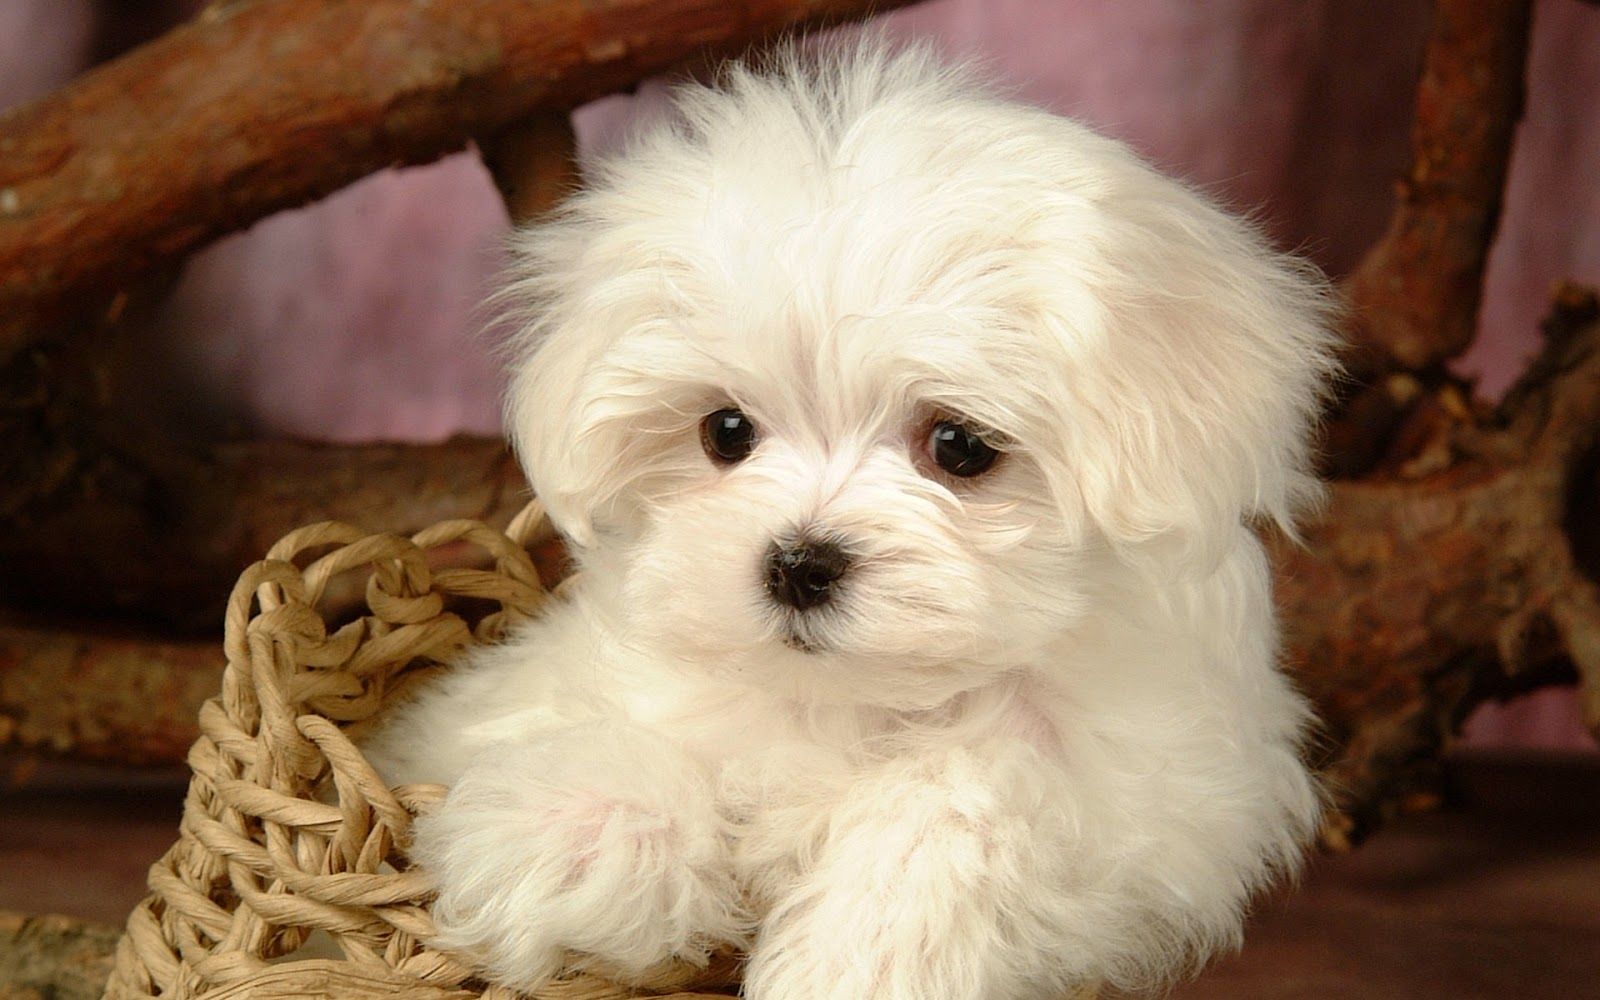 Cute baby dogs wallpaper download